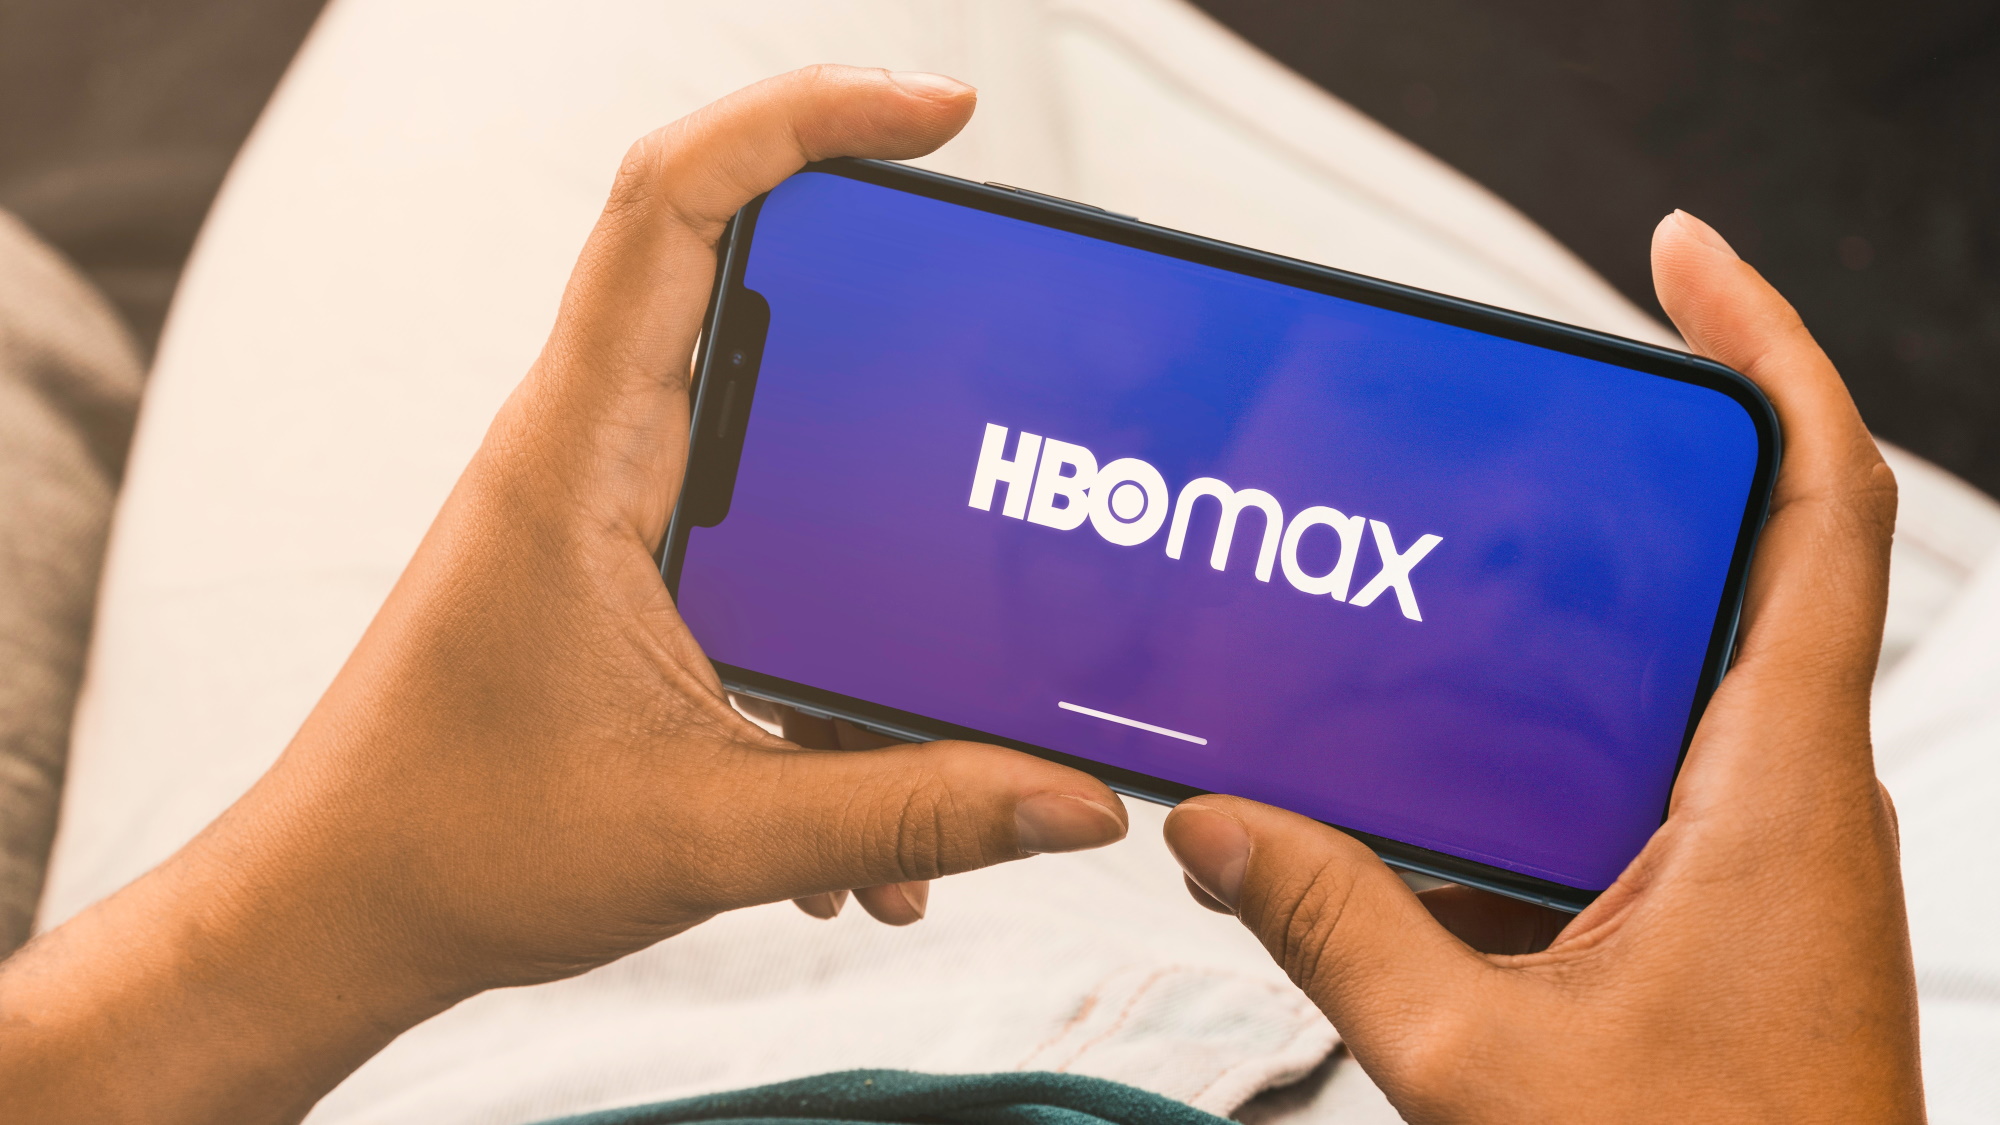 HBO Max logo on a smartphone being held by two hands